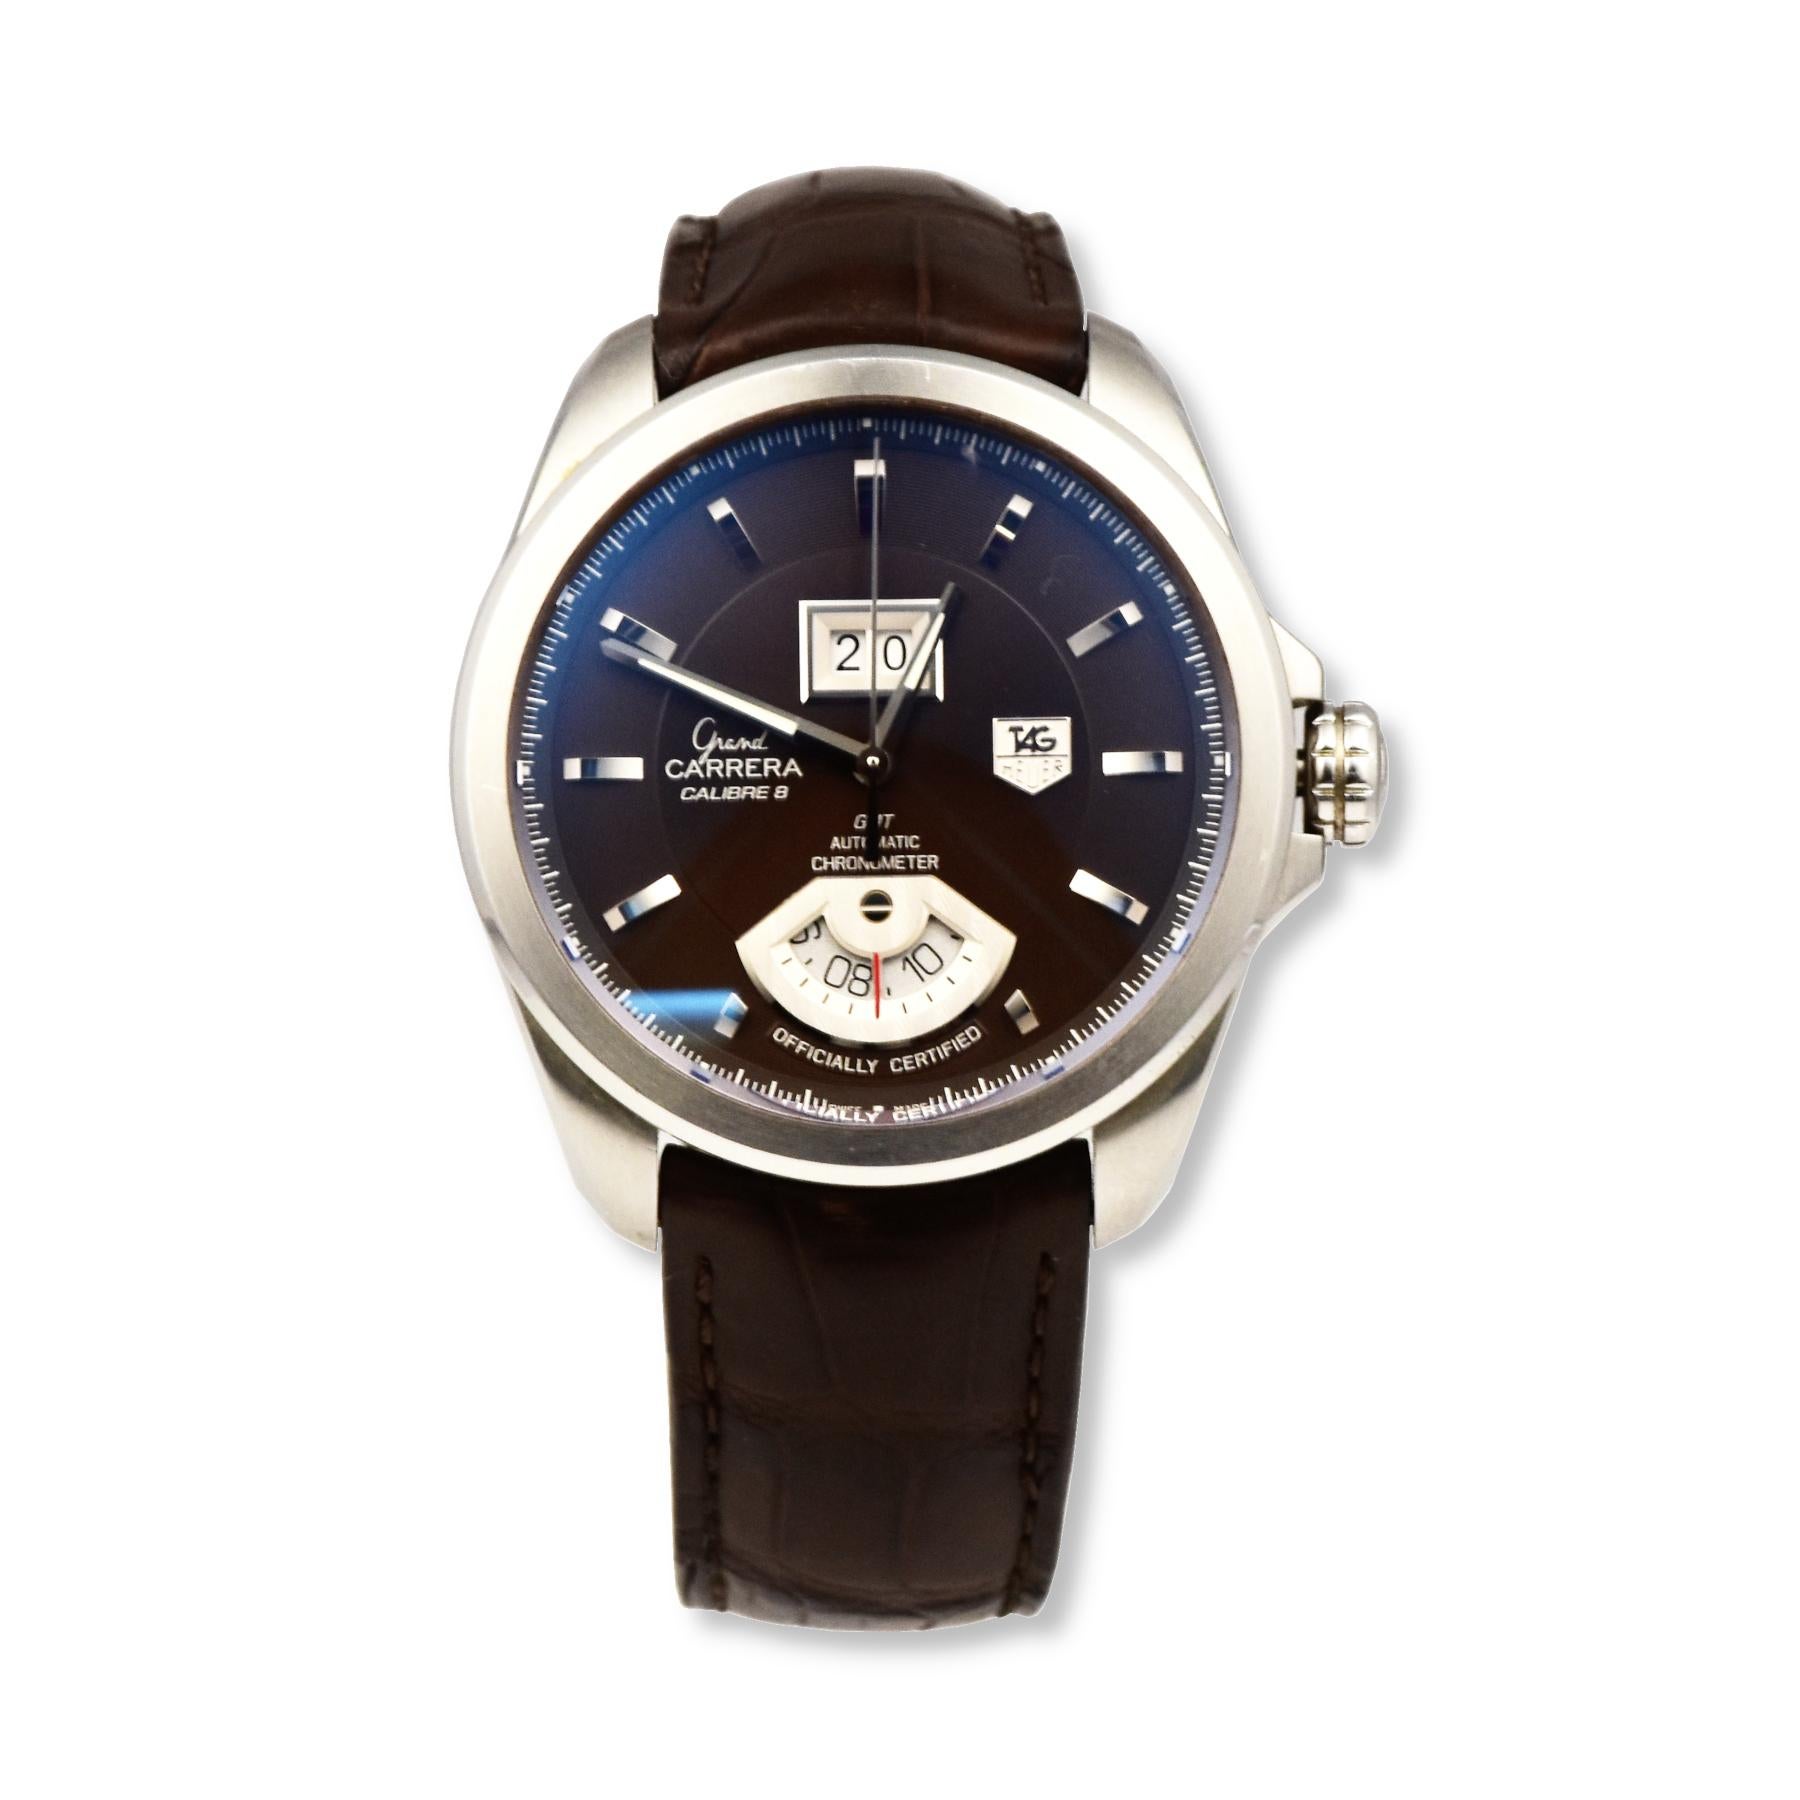 This Tag Heuer Grand Carrera Calibre 8 has a Silver-tone stainless steel case with a brown crocodile leather strap. Fixed silver-tone stainless steel bezel. Brown dial with silver-tone hands and index hour markers. Minute markers around the outer